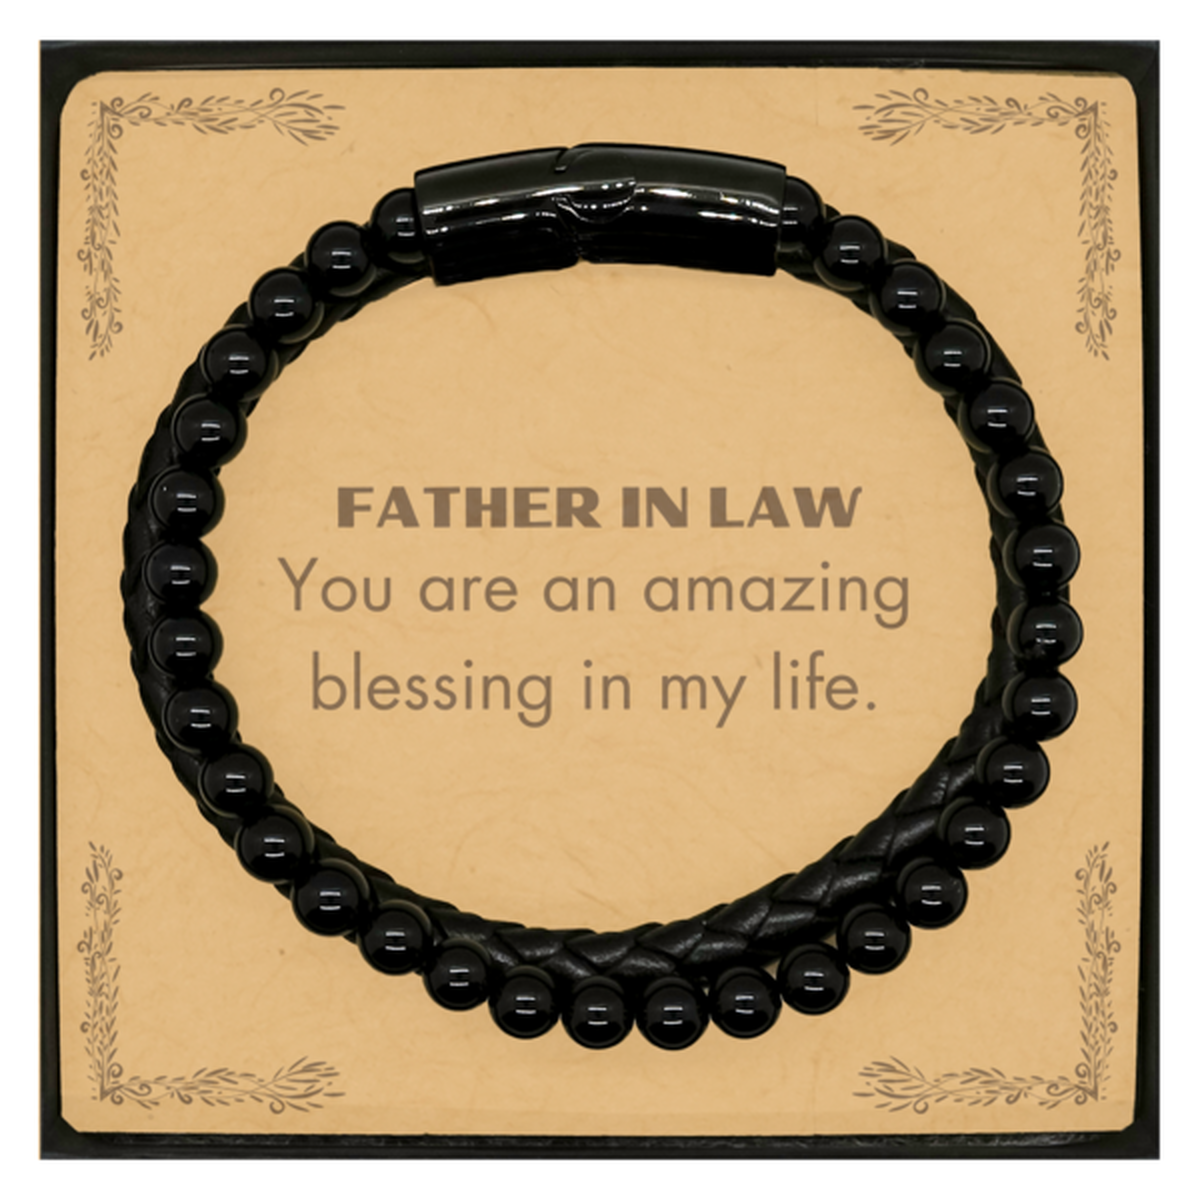 Father In Law Stone Leather Bracelets, You are an amazing blessing in my life, Thank You Gifts For Father In Law, Inspirational Birthday Christmas Unique Gifts For Father In Law